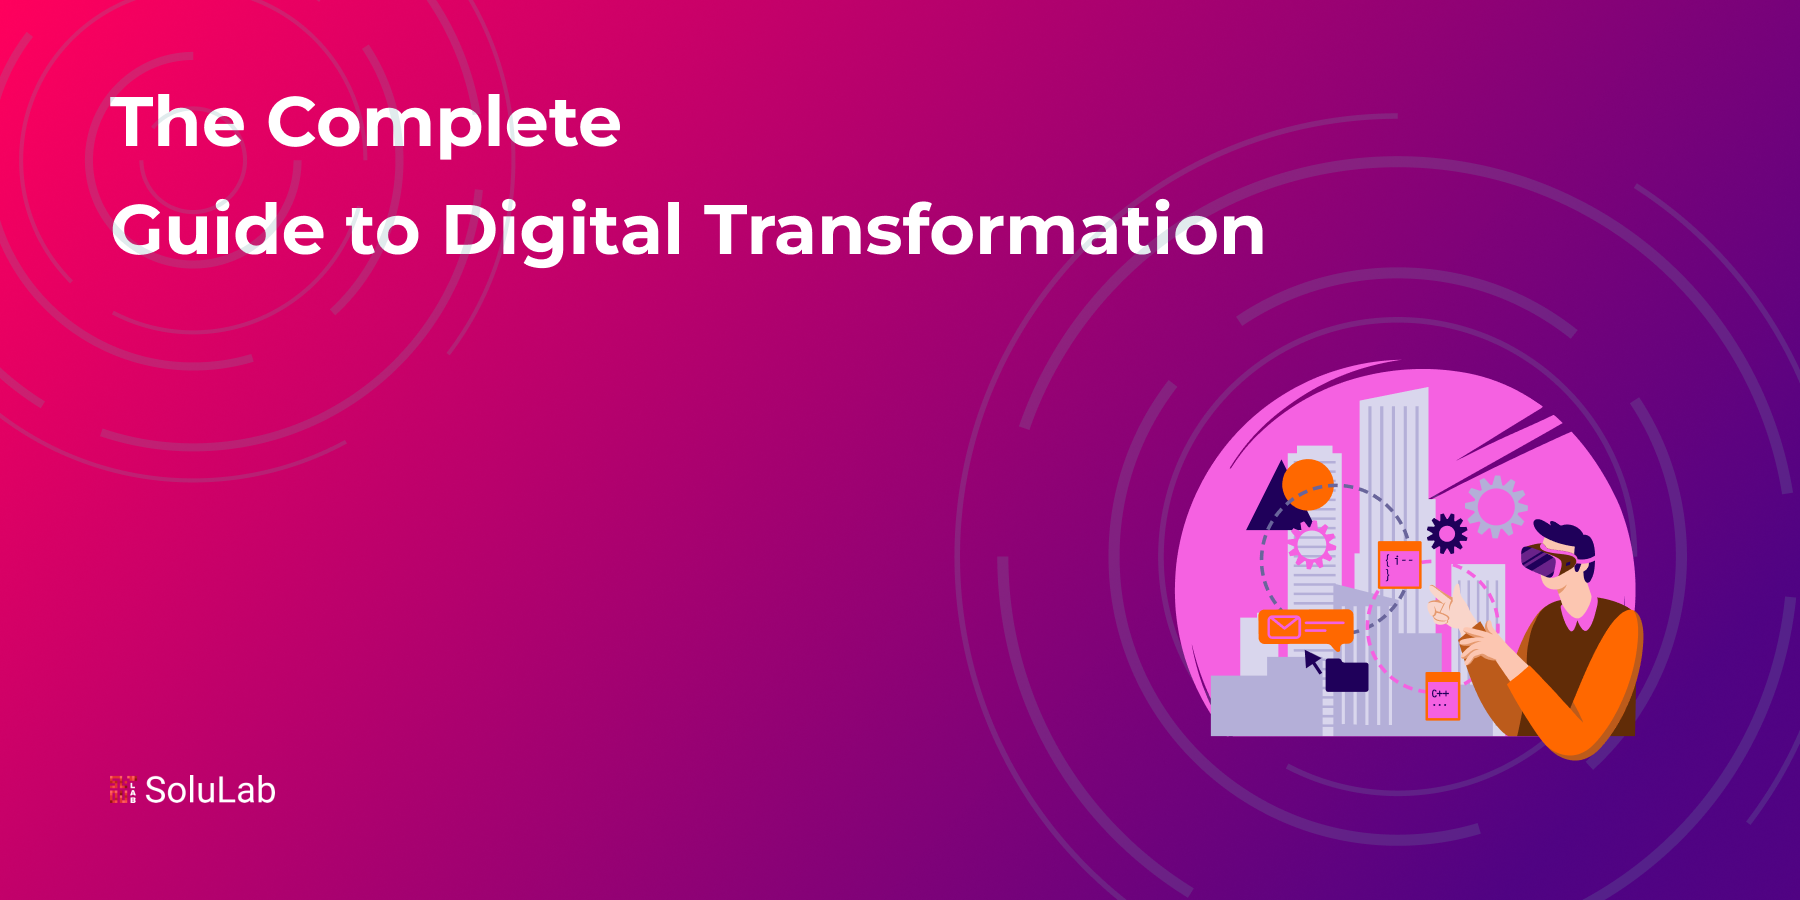 The Complete Guide to Digital Transformation